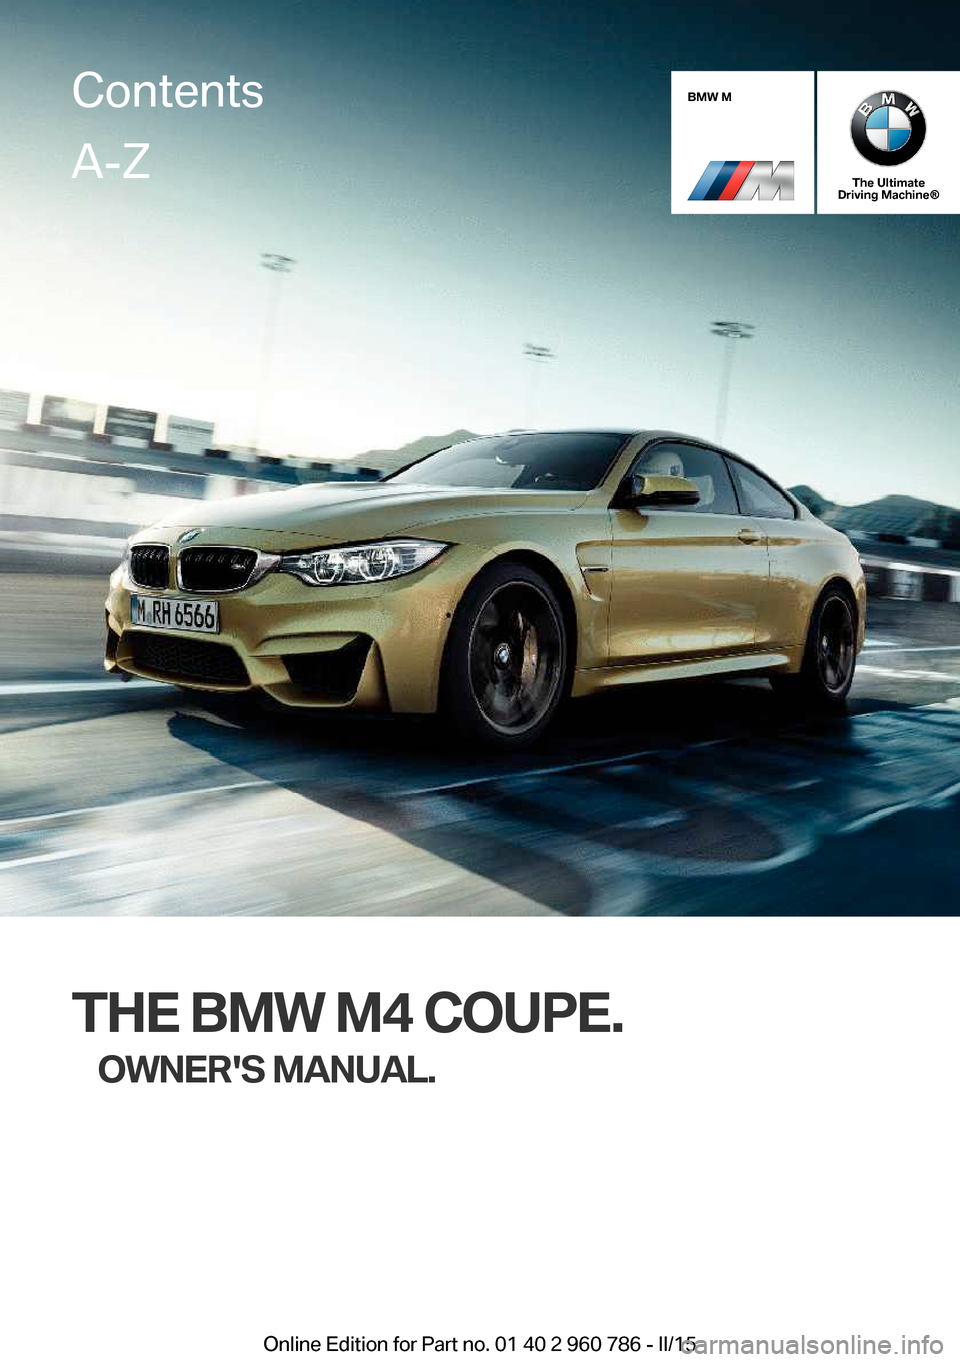 BMW M4 COUPE 2016 F82 Owners Manual BMW M
The Ultimate
Driving Machine®
THE BMW M4 COUPE.
OWNERS MANUAL.
ContentsA-Z
Online Edition for Part no. 01 40 2 960 786 - II/15   